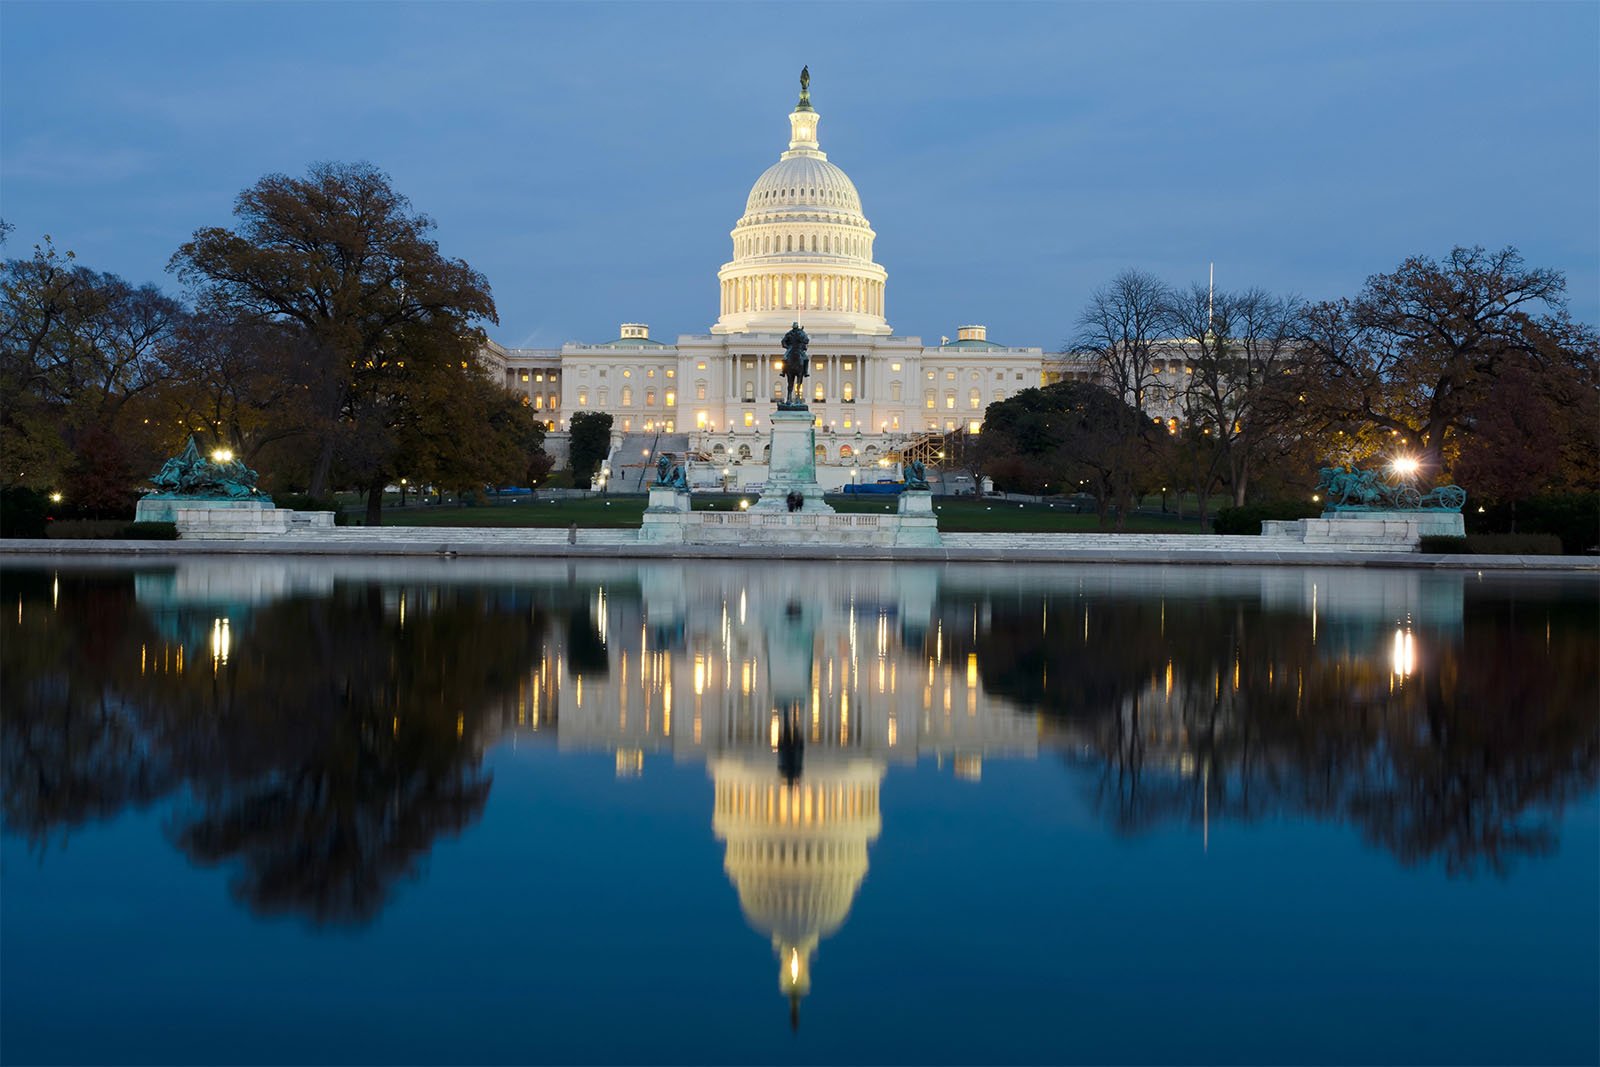 The united states capitol building illuminated at night, reflected perfectly in the calm waters of a pool, with surrounding trees in early twilight.